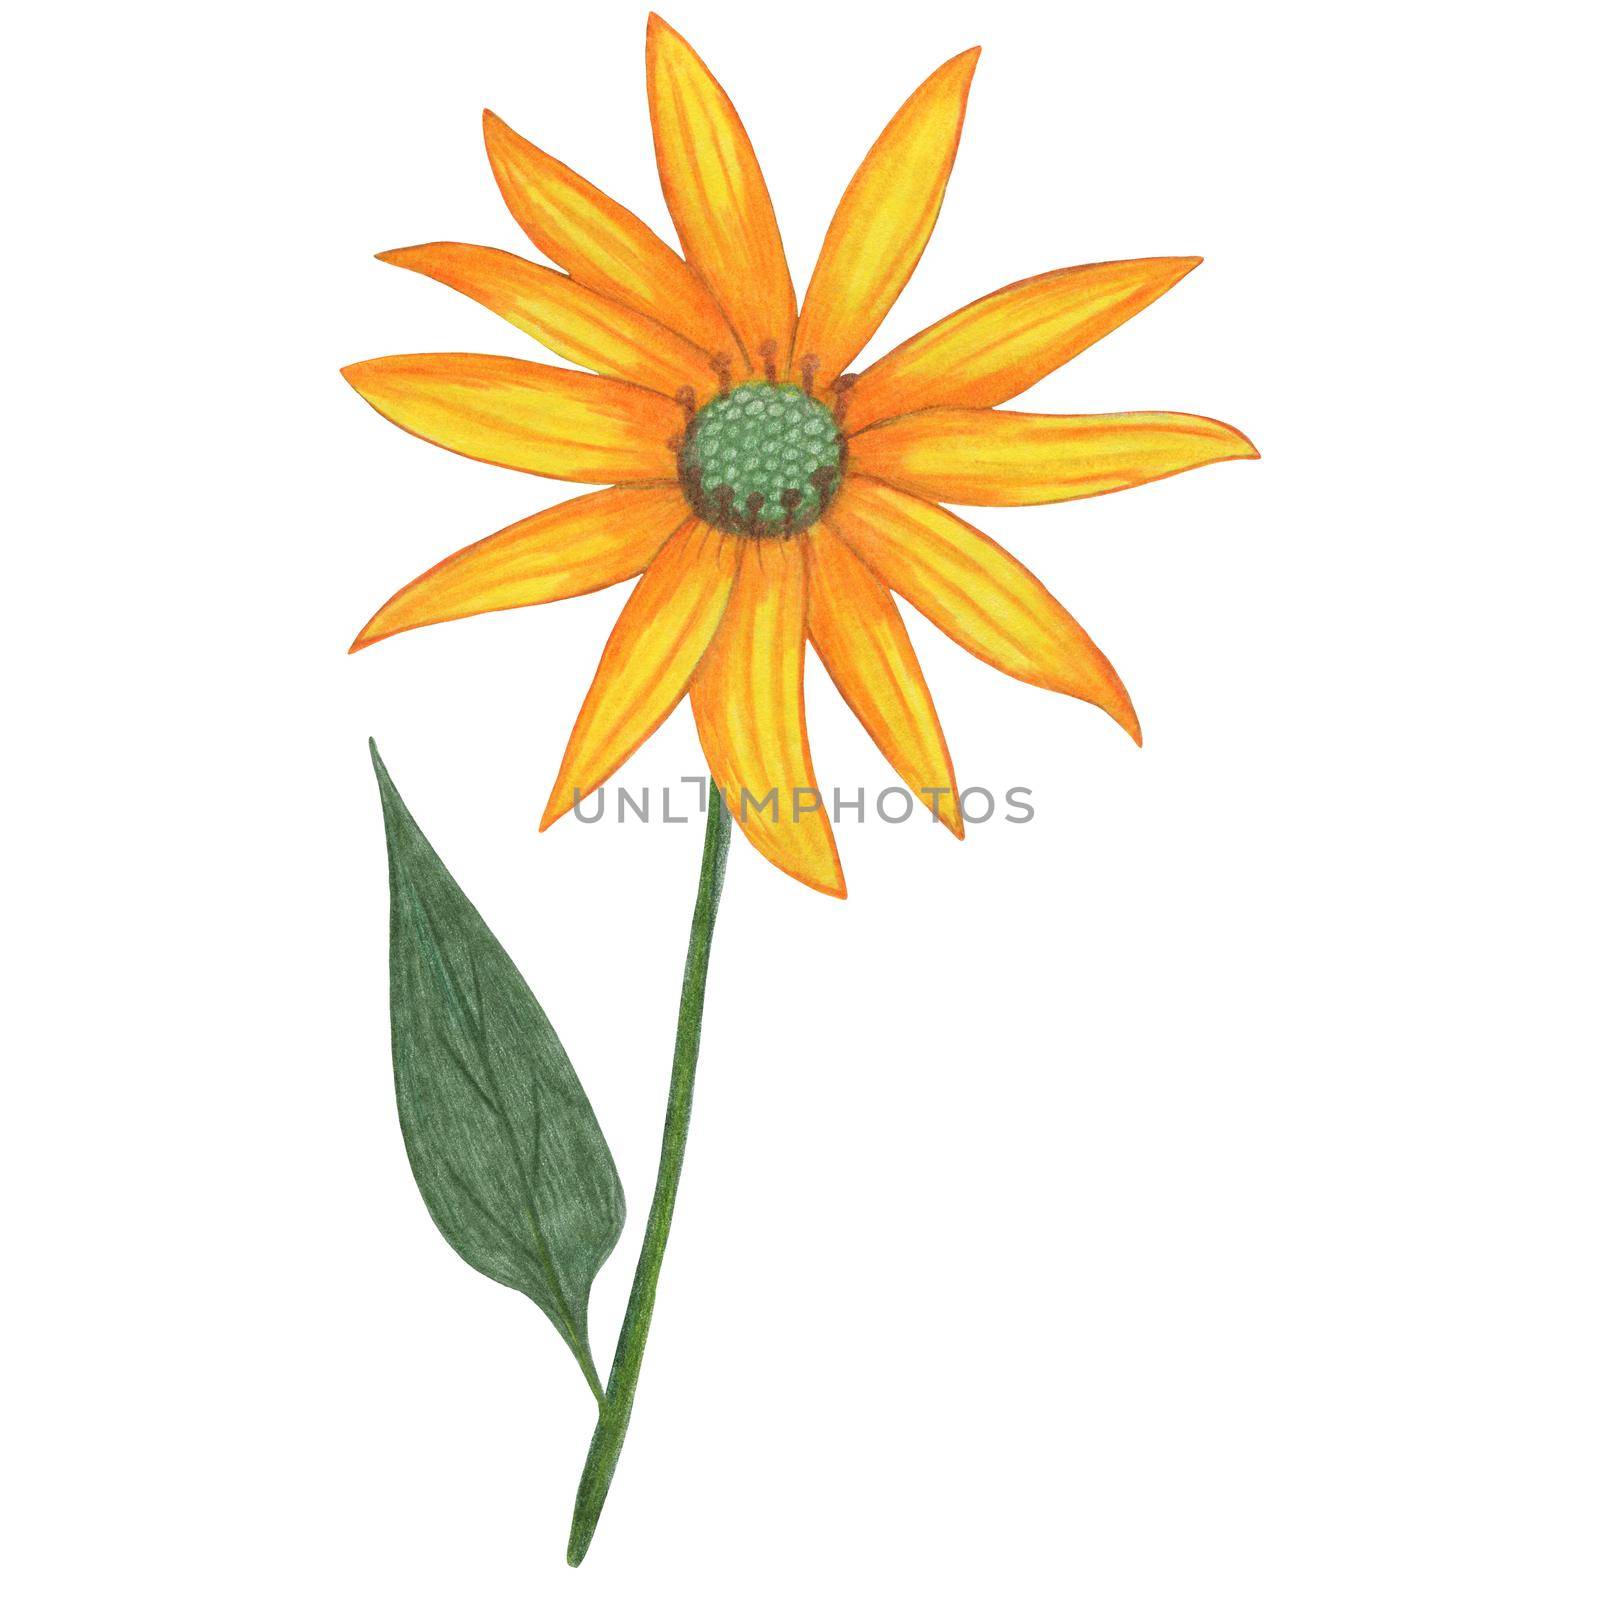 Yellow Topinambur with Green Leaves Isolated on White Background. Jerusalem Artichoke Flower Element Drawn by Colored Pencil.